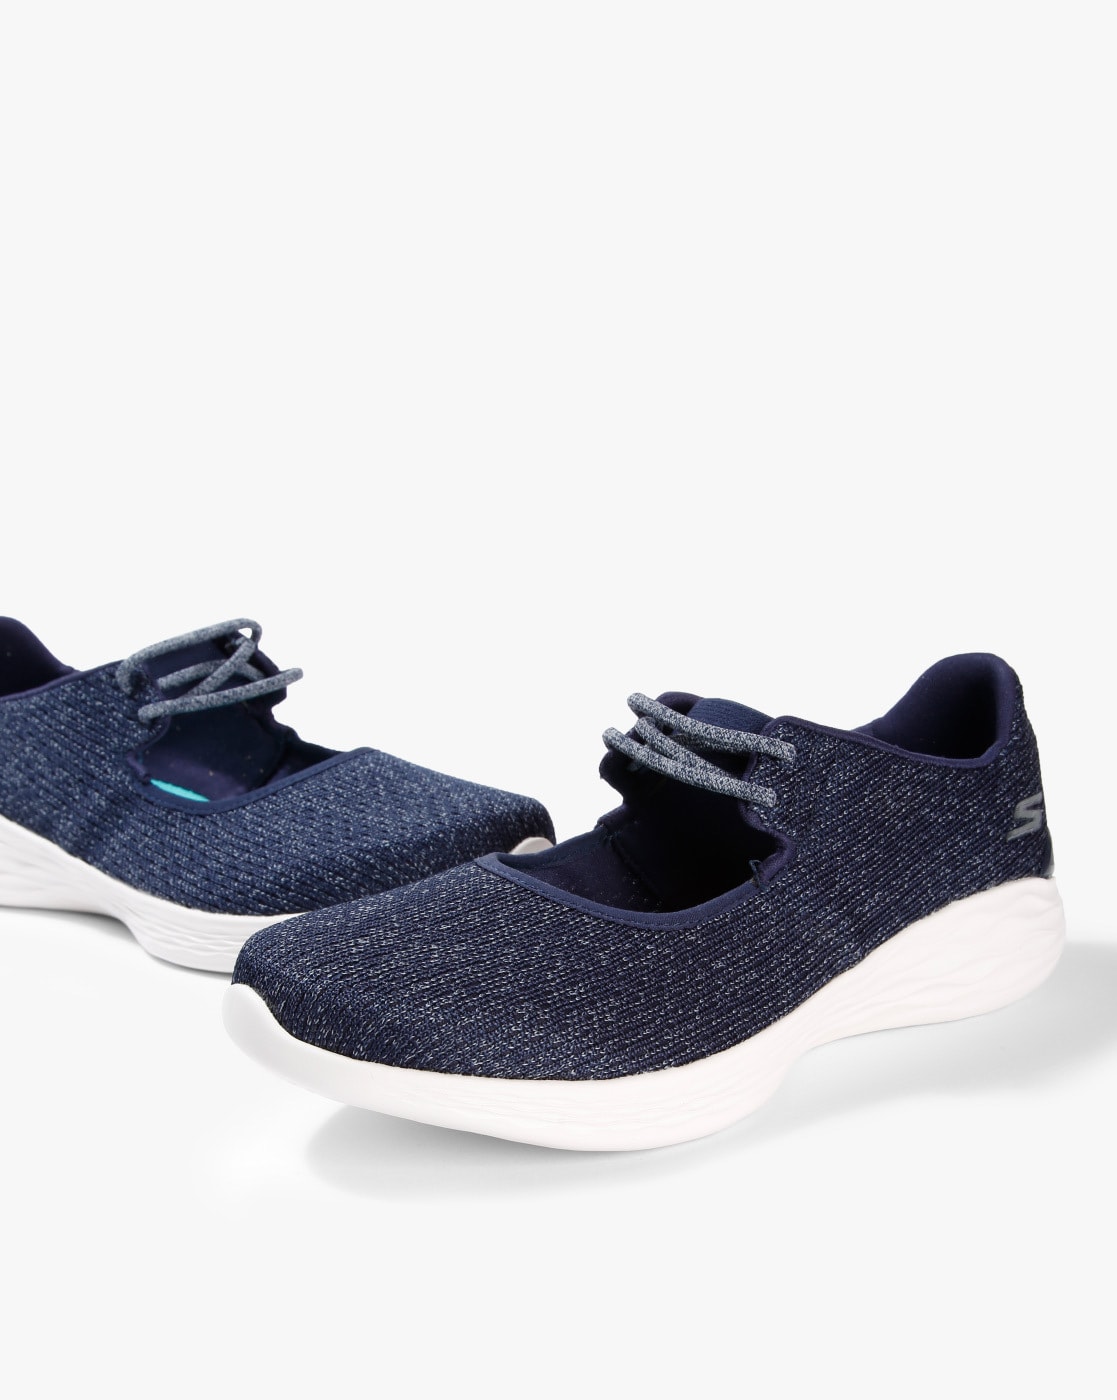 skechers slip on shoes with cut out